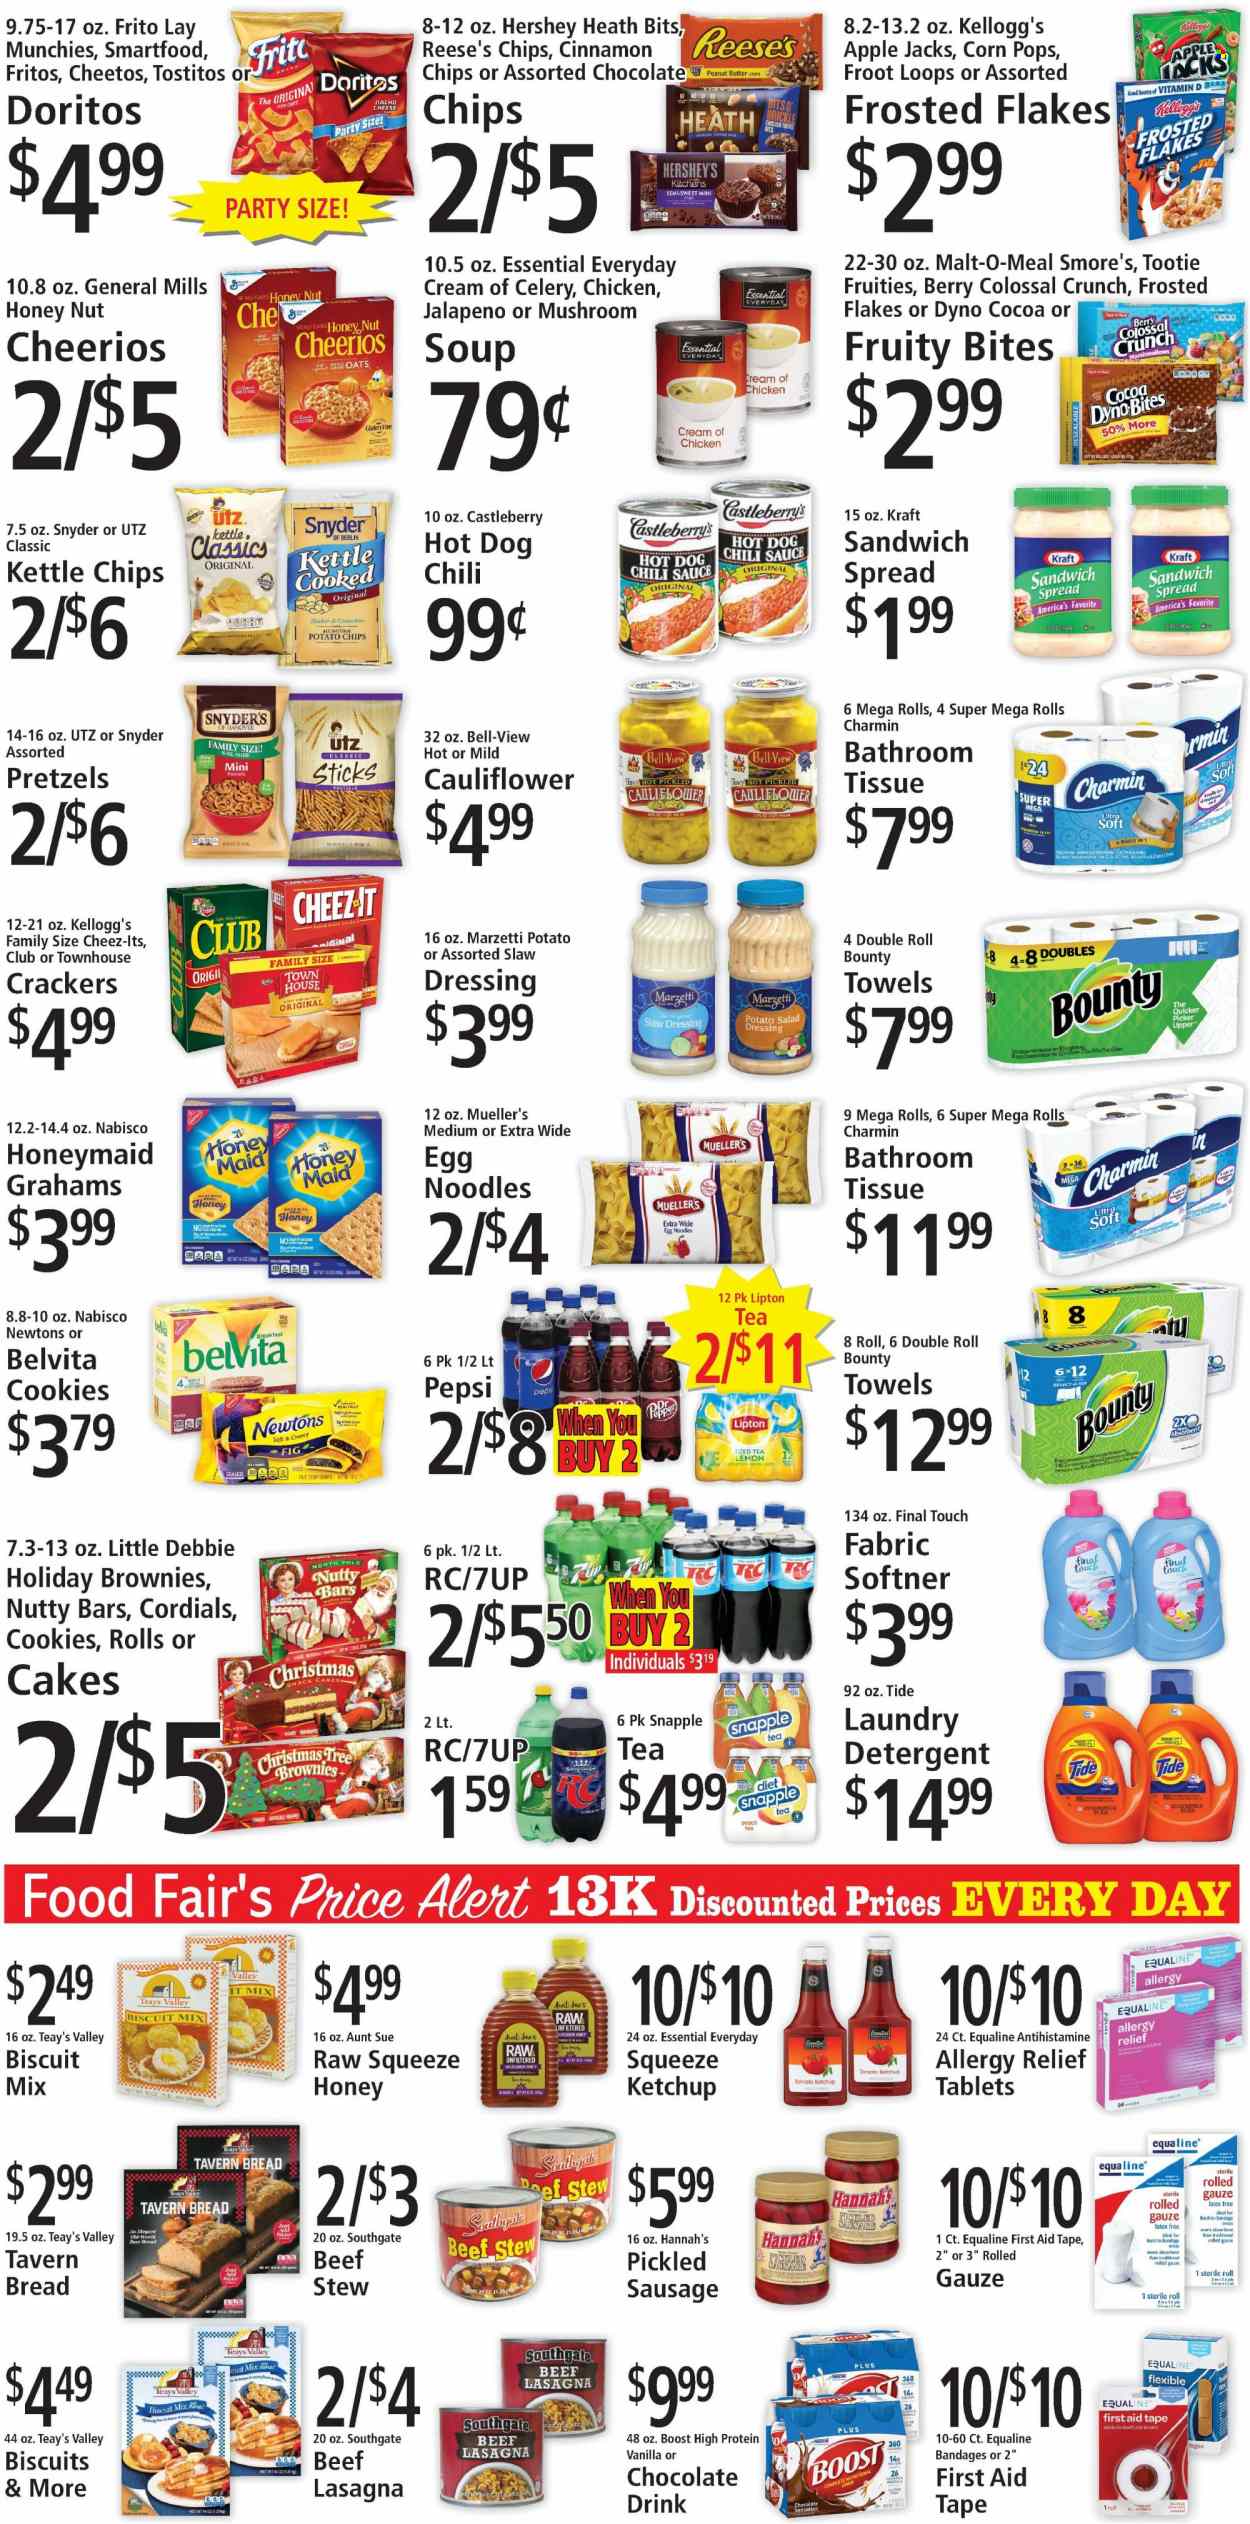 thumbnail - Food Fair Market Flyer - 11/27/2022 - 12/03/2022 - Sales products - bread, pretzels, cake, jalapeño, soup, sauce, noodles, lasagna meal, Kraft®, sausage, potato salad, Reese's, Hershey's, cookies, Nestlé, snack, Bounty, crackers, Kellogg's, biscuit, Doritos, Fritos, potato chips, Cheetos, chips, Smartfood, Tostitos, malt, Cheerios, Frosted Flakes, Corn Pops, belVita, Honey Maid, egg noodles, cinnamon, salad dressing, ketchup, chilli sauce, dressing, oil, peanut butter, Pepsi, Lipton, ice tea, 7UP, Snapple, chocolate drink, Boost, beer, allergy relief. Page 4.